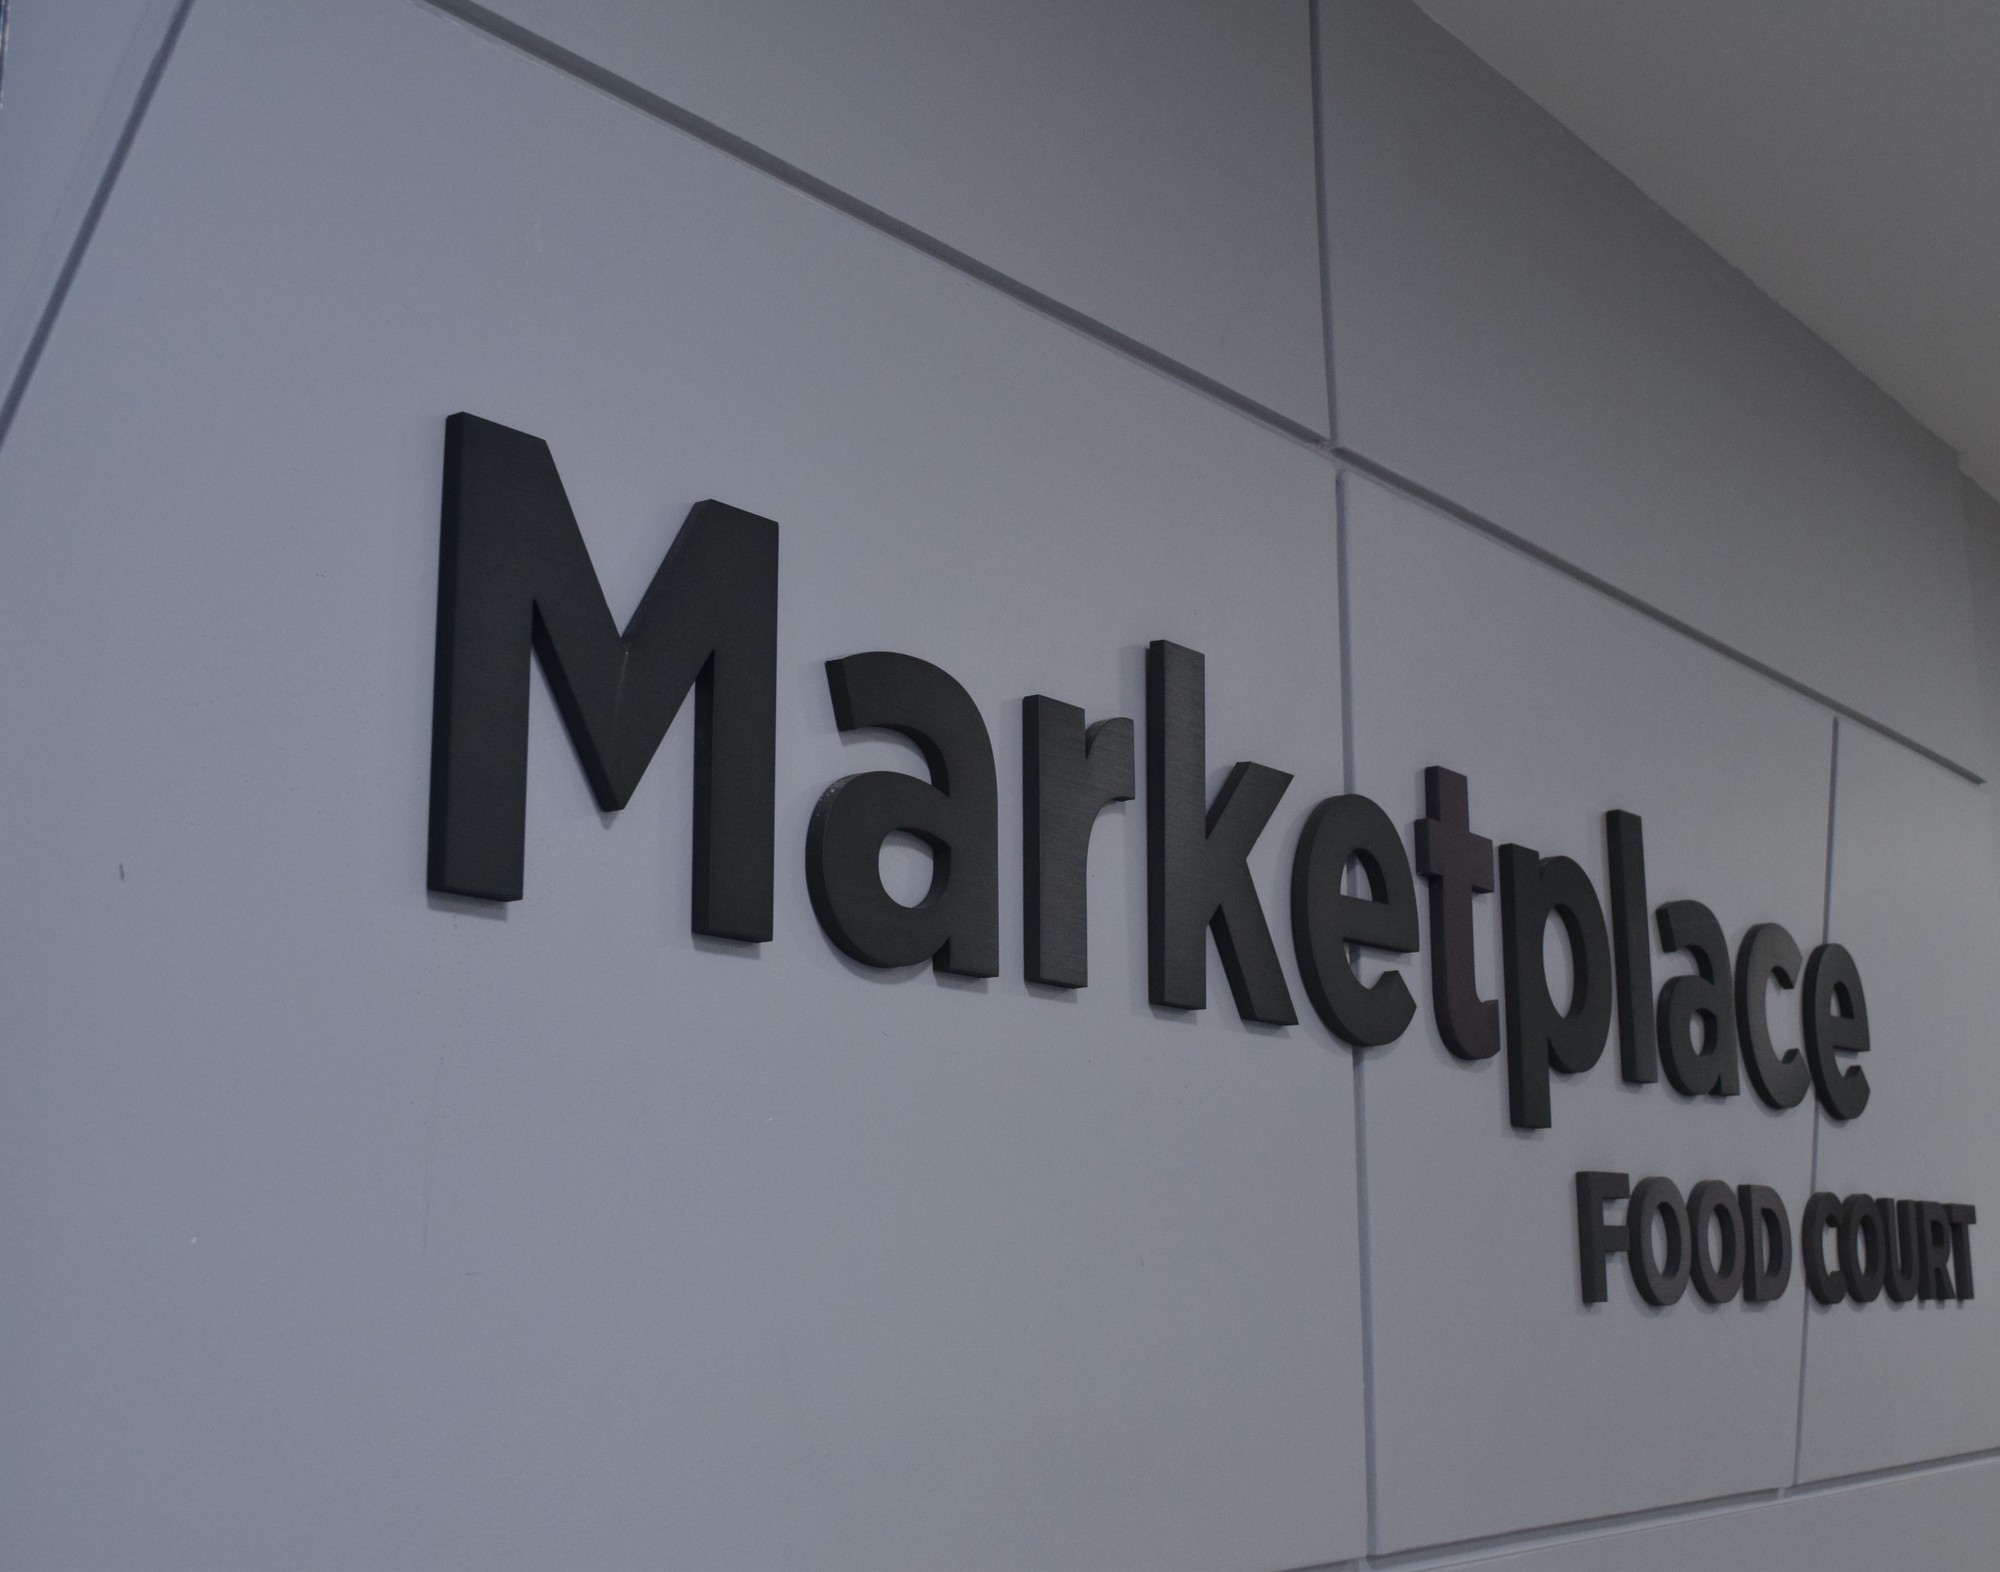 Marketplace Food Court is still open to serve students and staff.